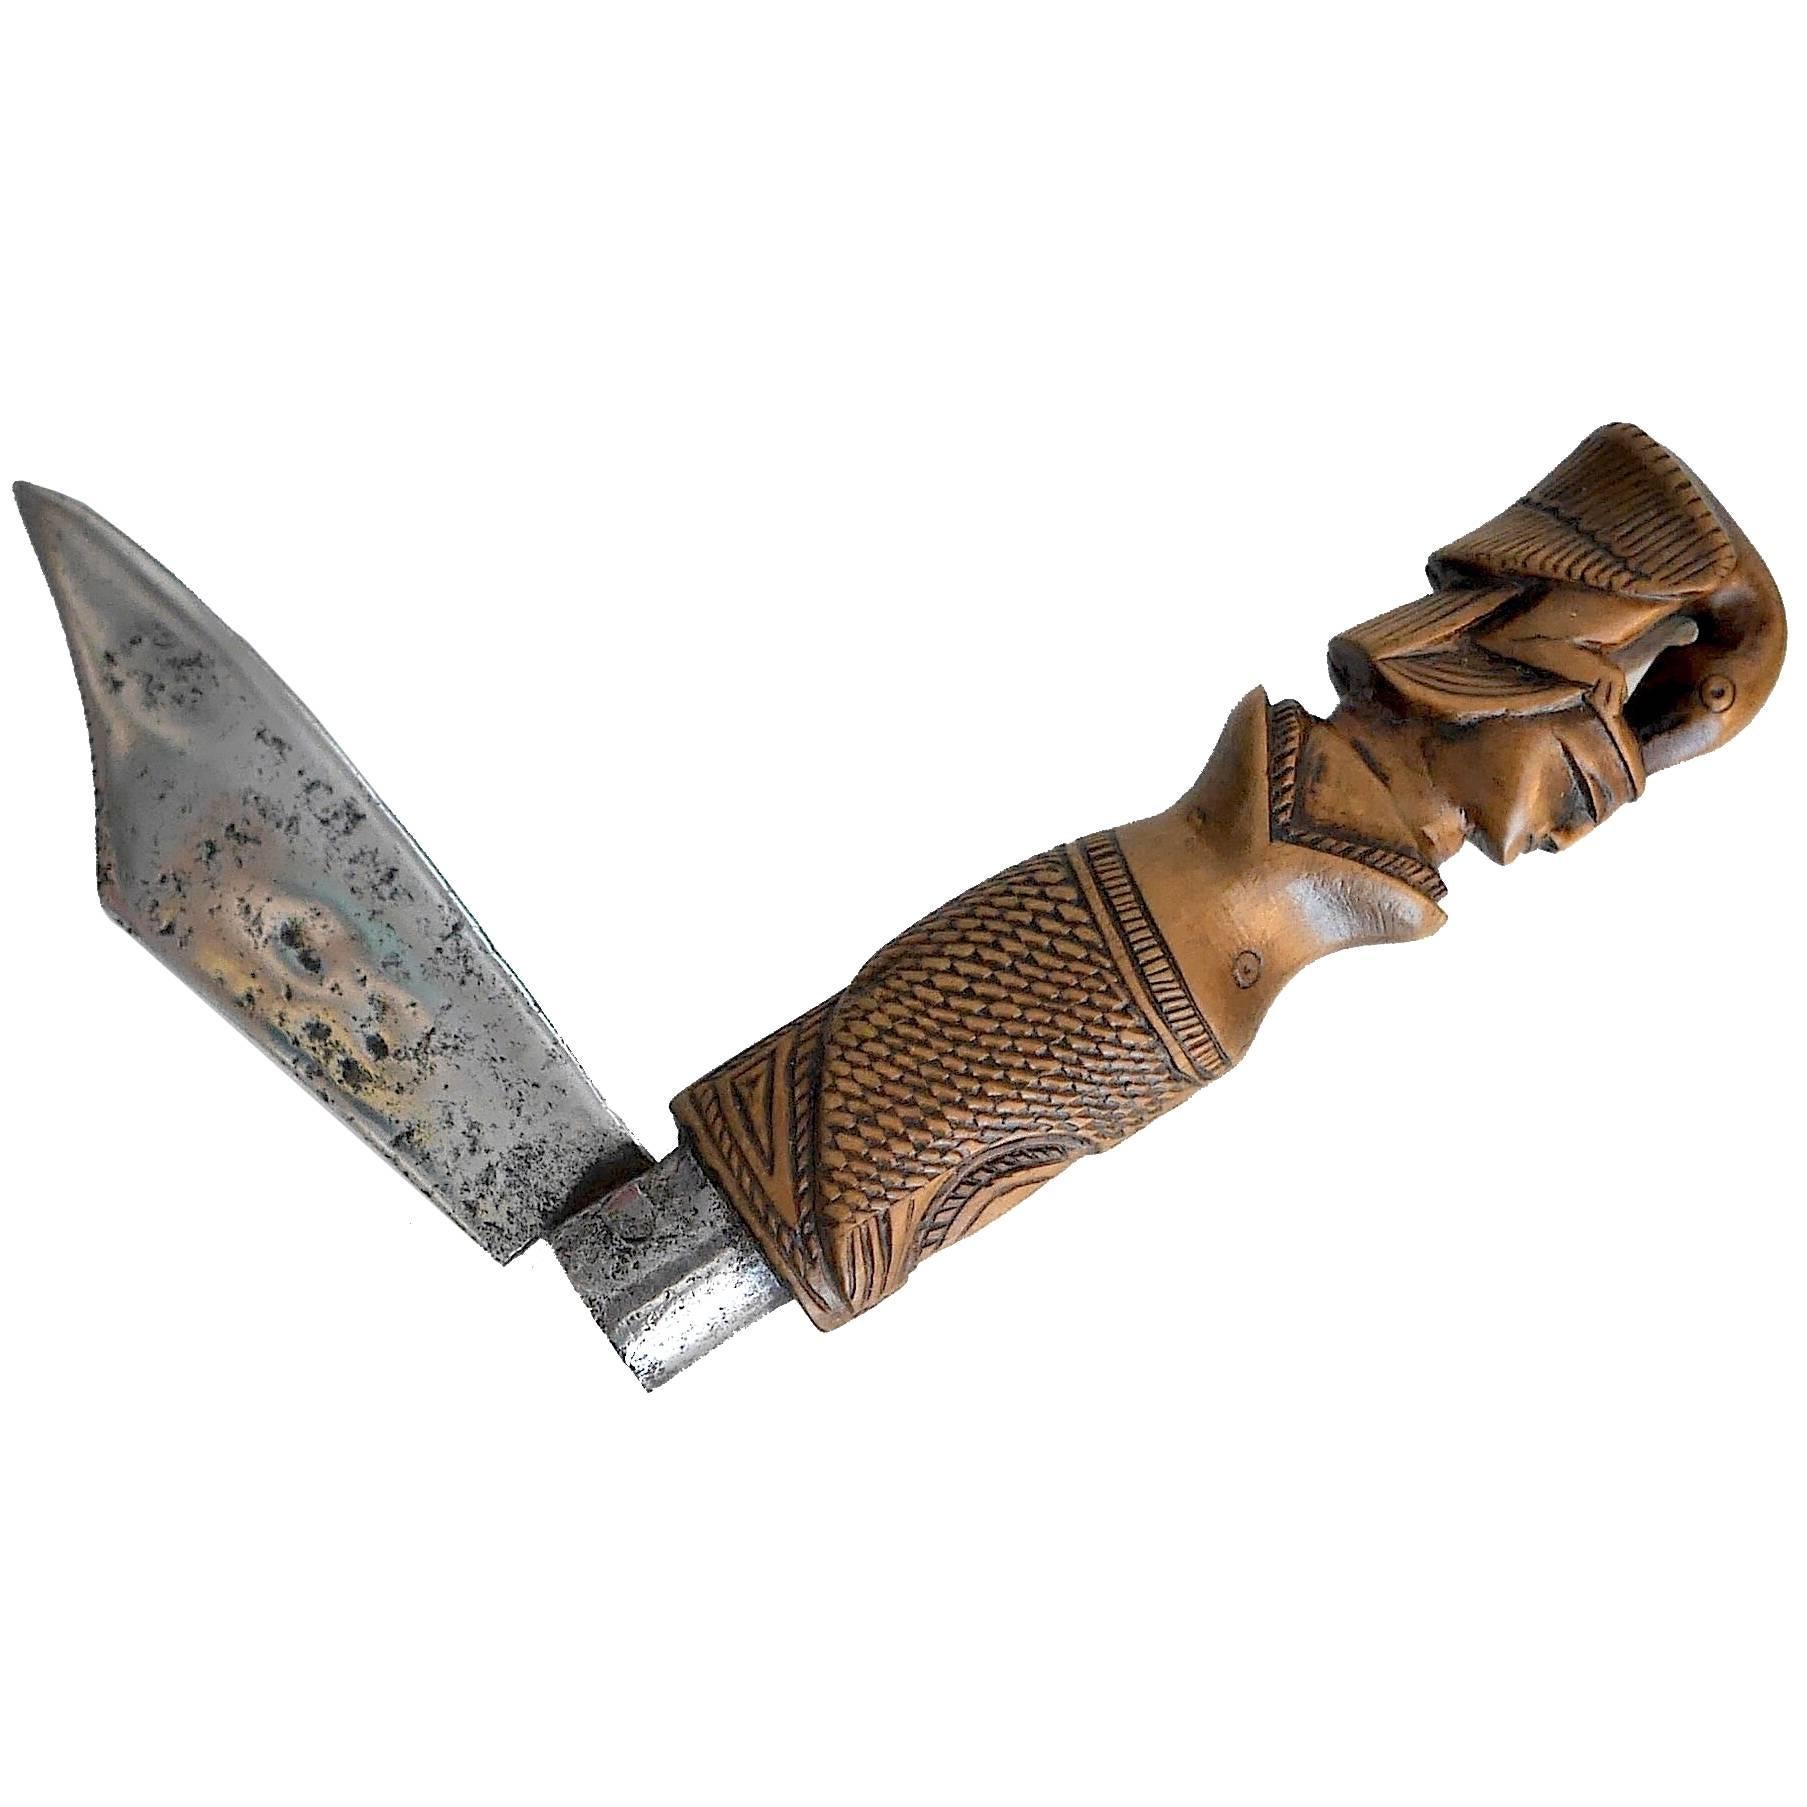 19th Century Sculpted Knife